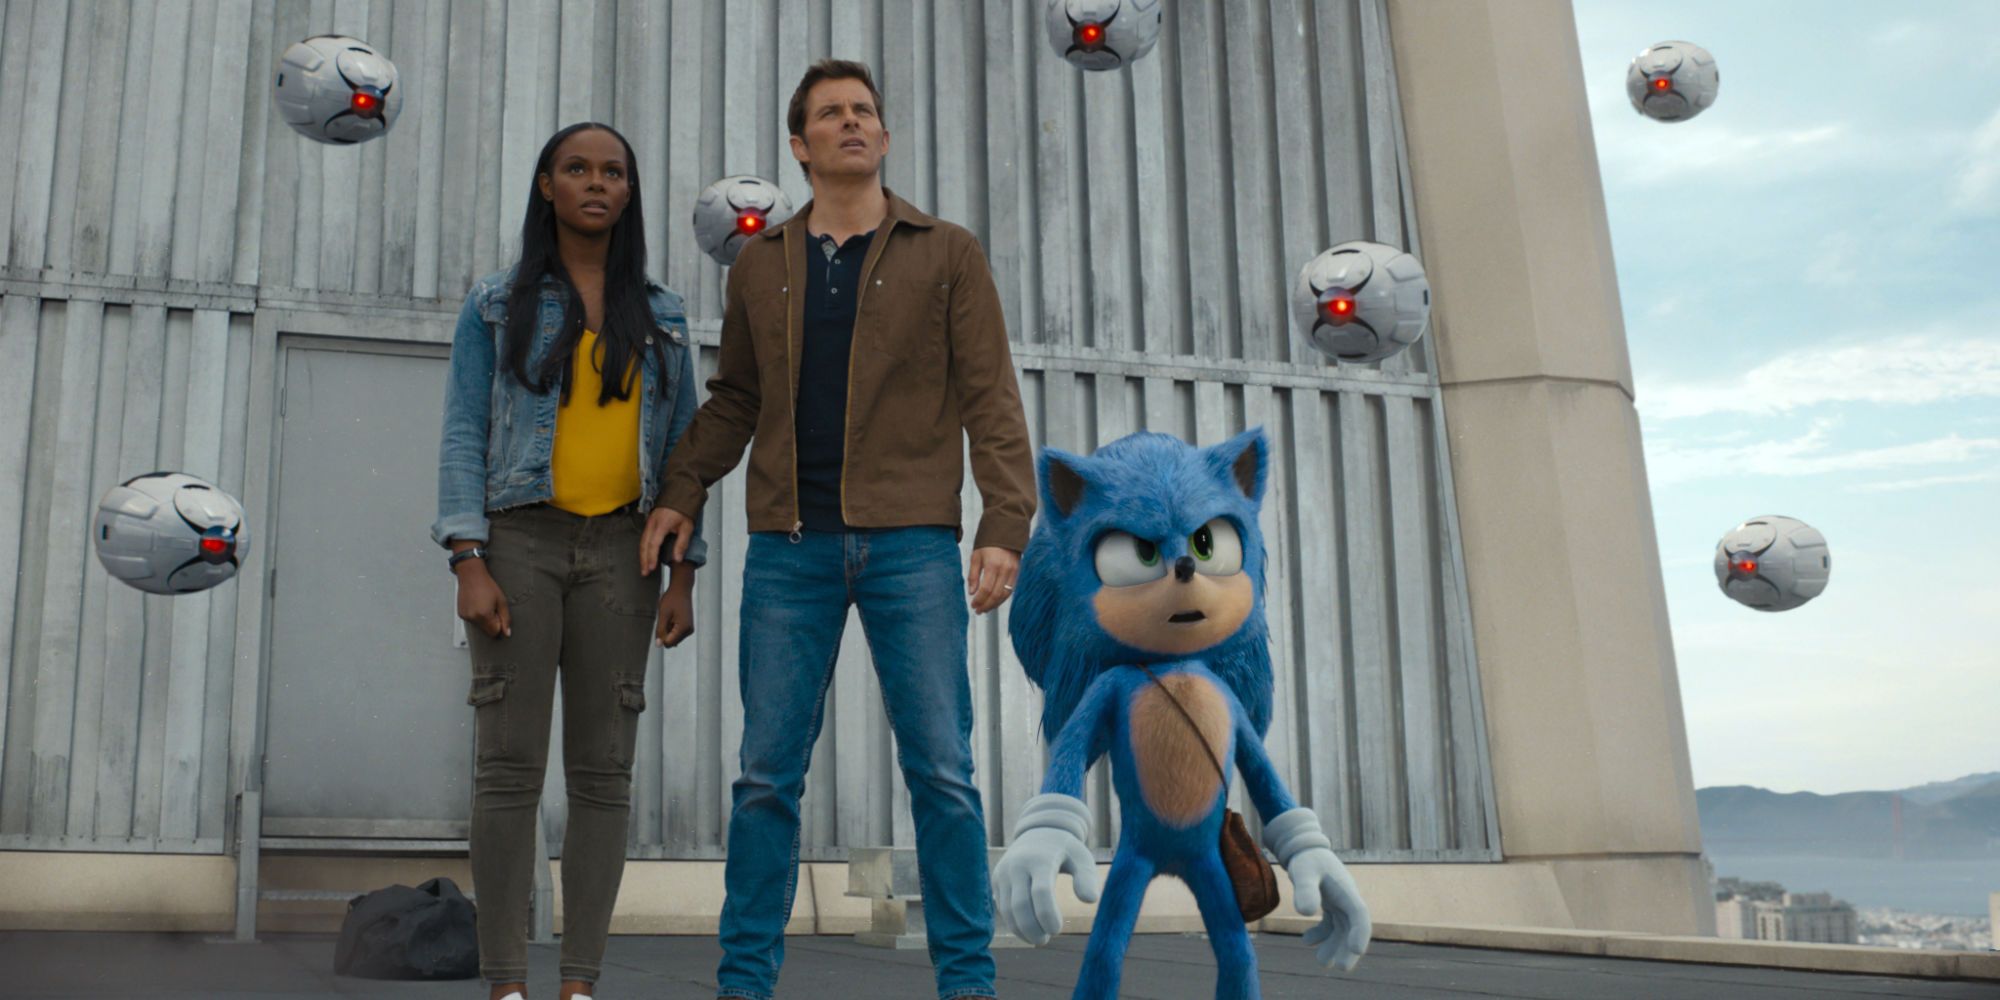 Sonic the Hedgehog 2 Starts Filming in March, According to Tika Sumpter